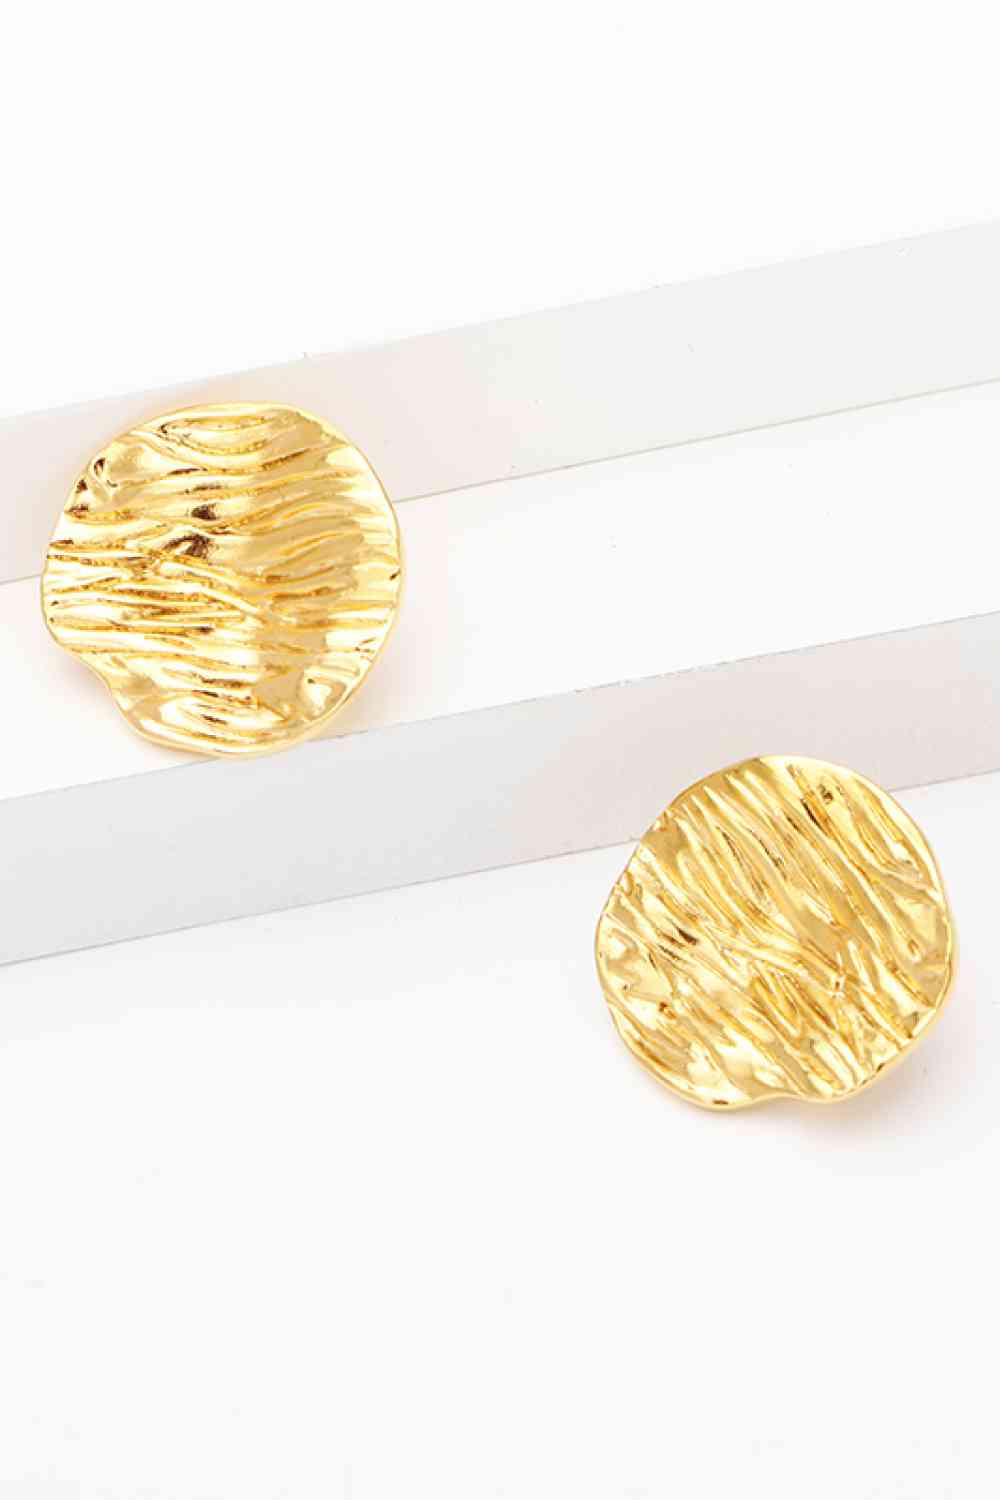 18K Gold-Plated Textured Stud Earrings